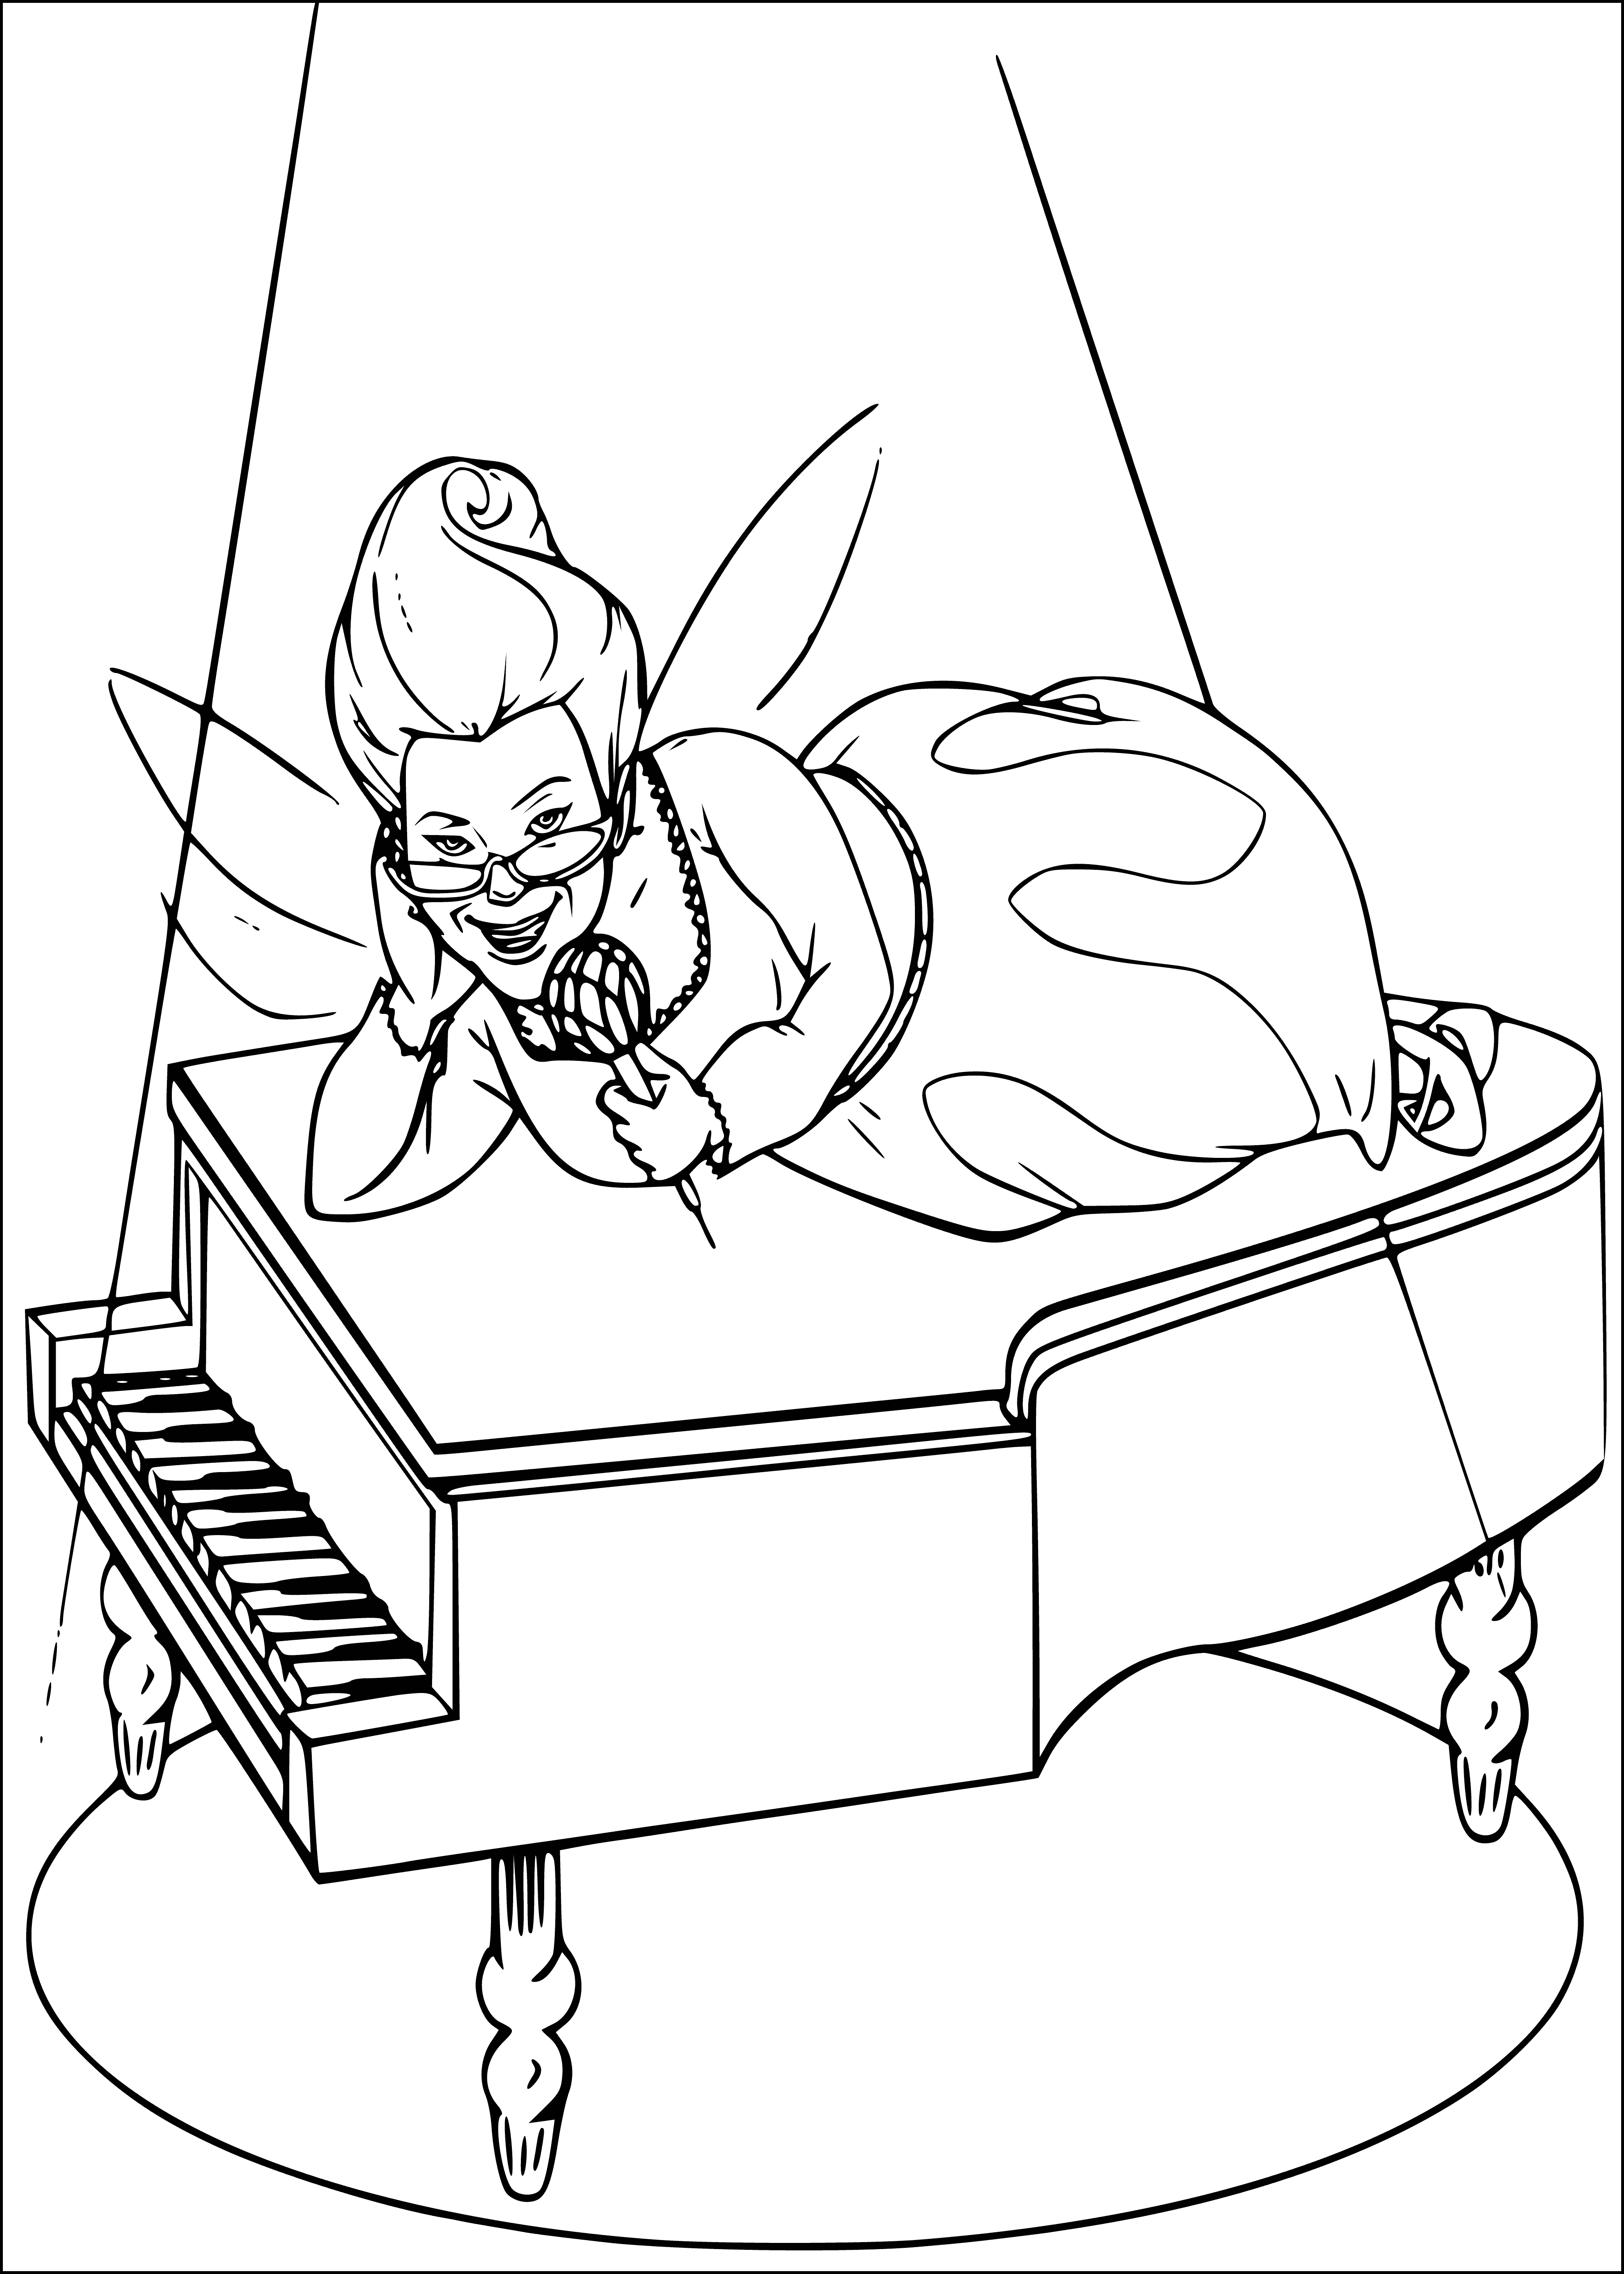 coloring page: Fairy Godmother loved making dreams come true but made a mistake with Shrek that accidentally turned them both into frogs.